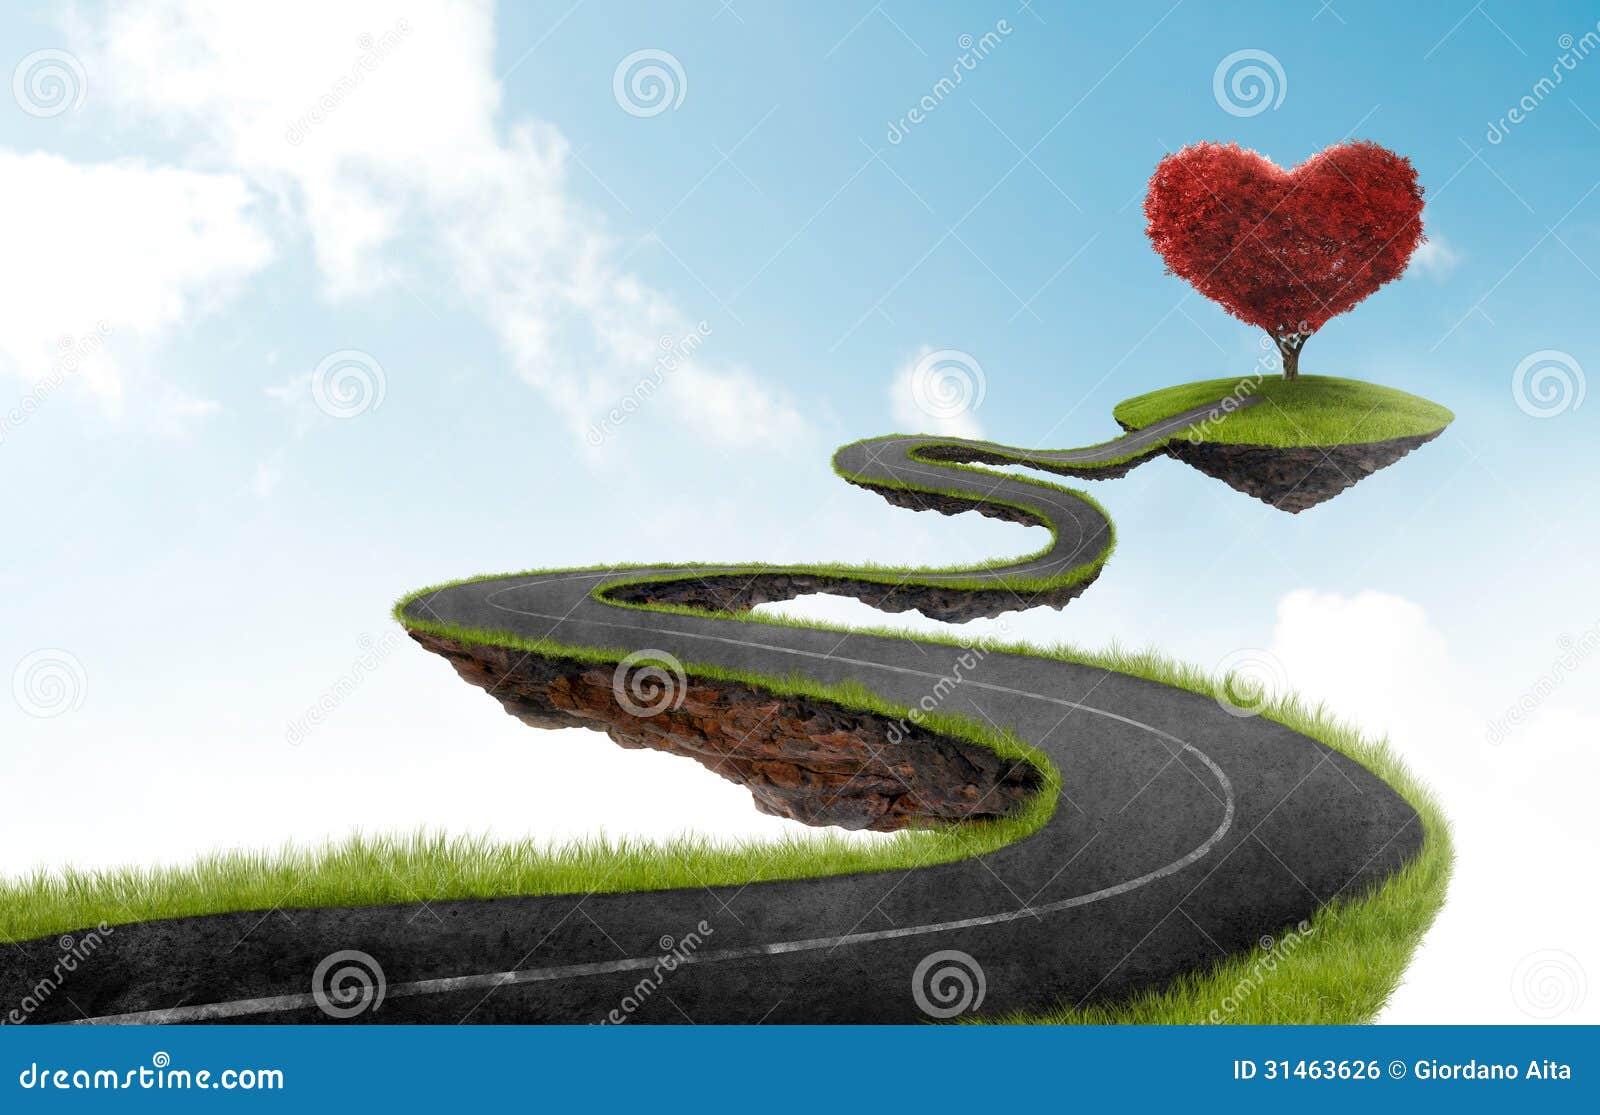 the road to heart tree